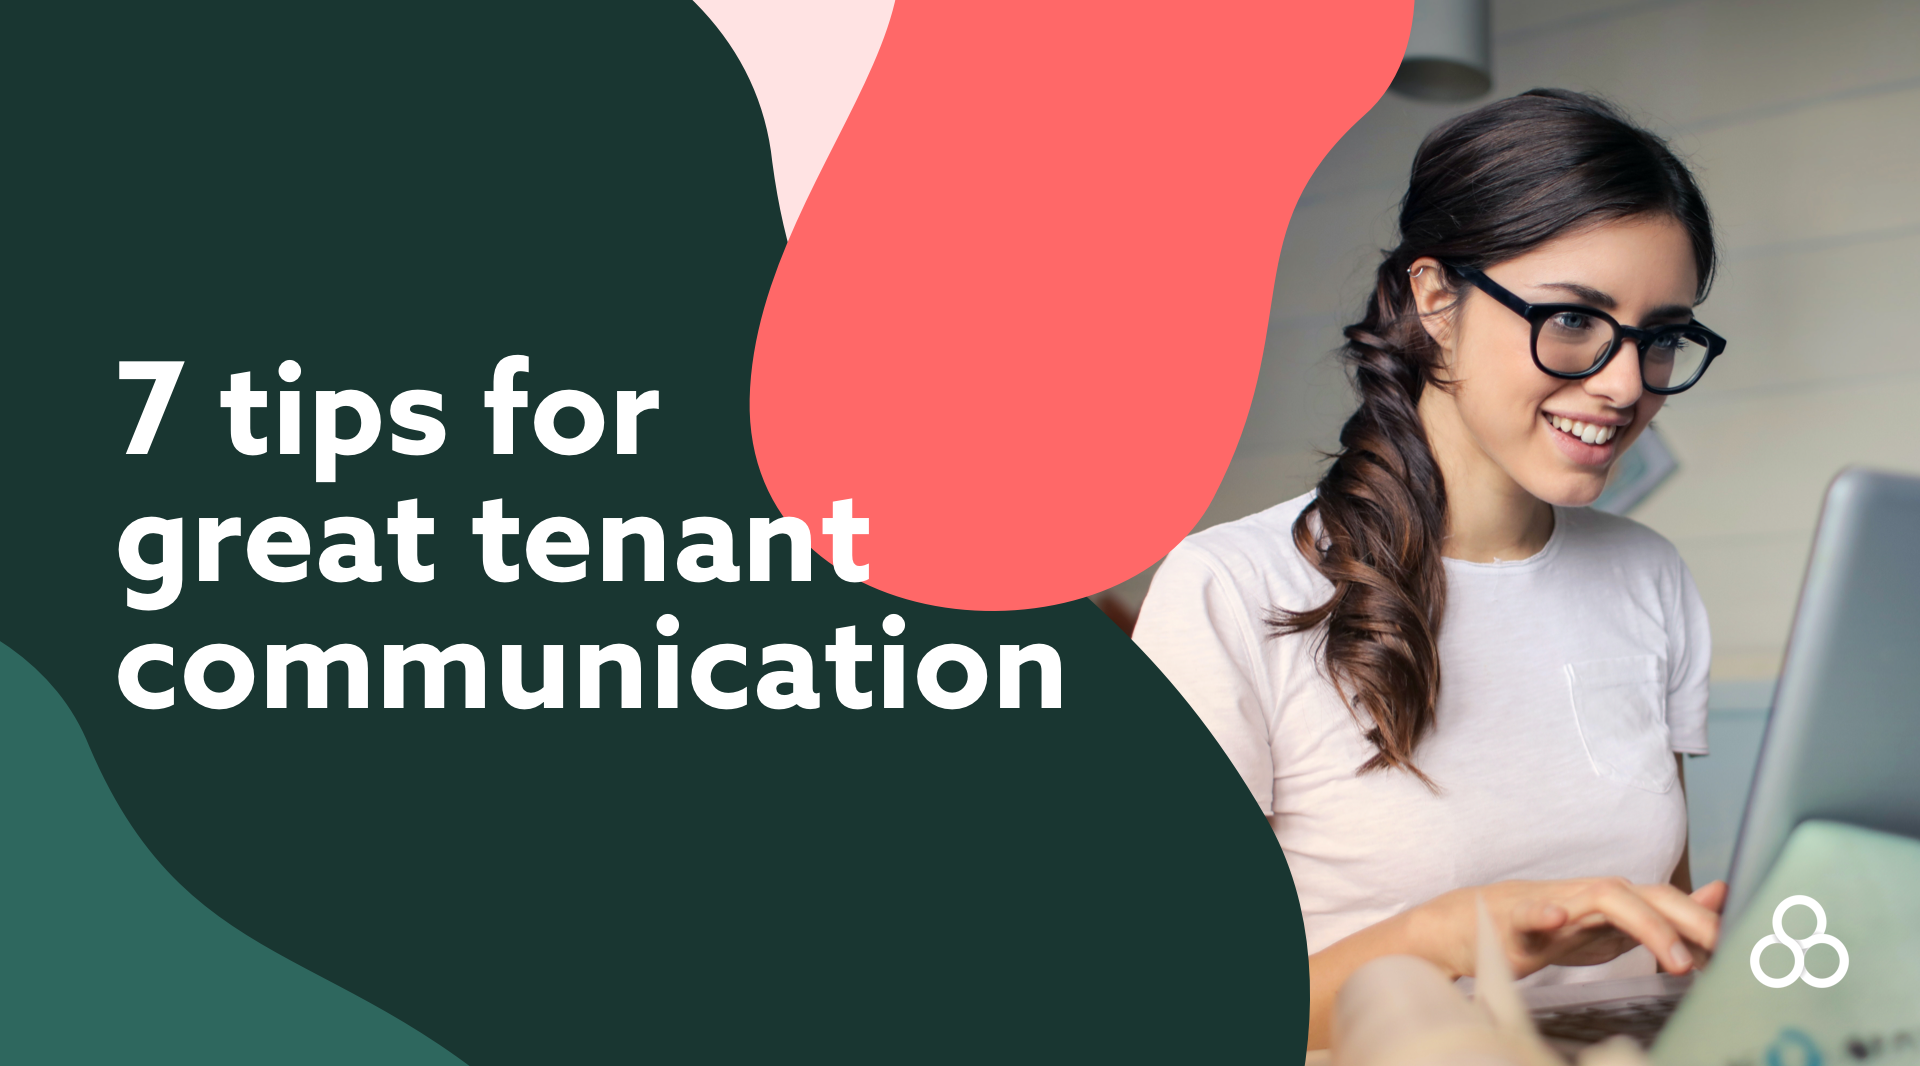 7 tips for great tenant communication